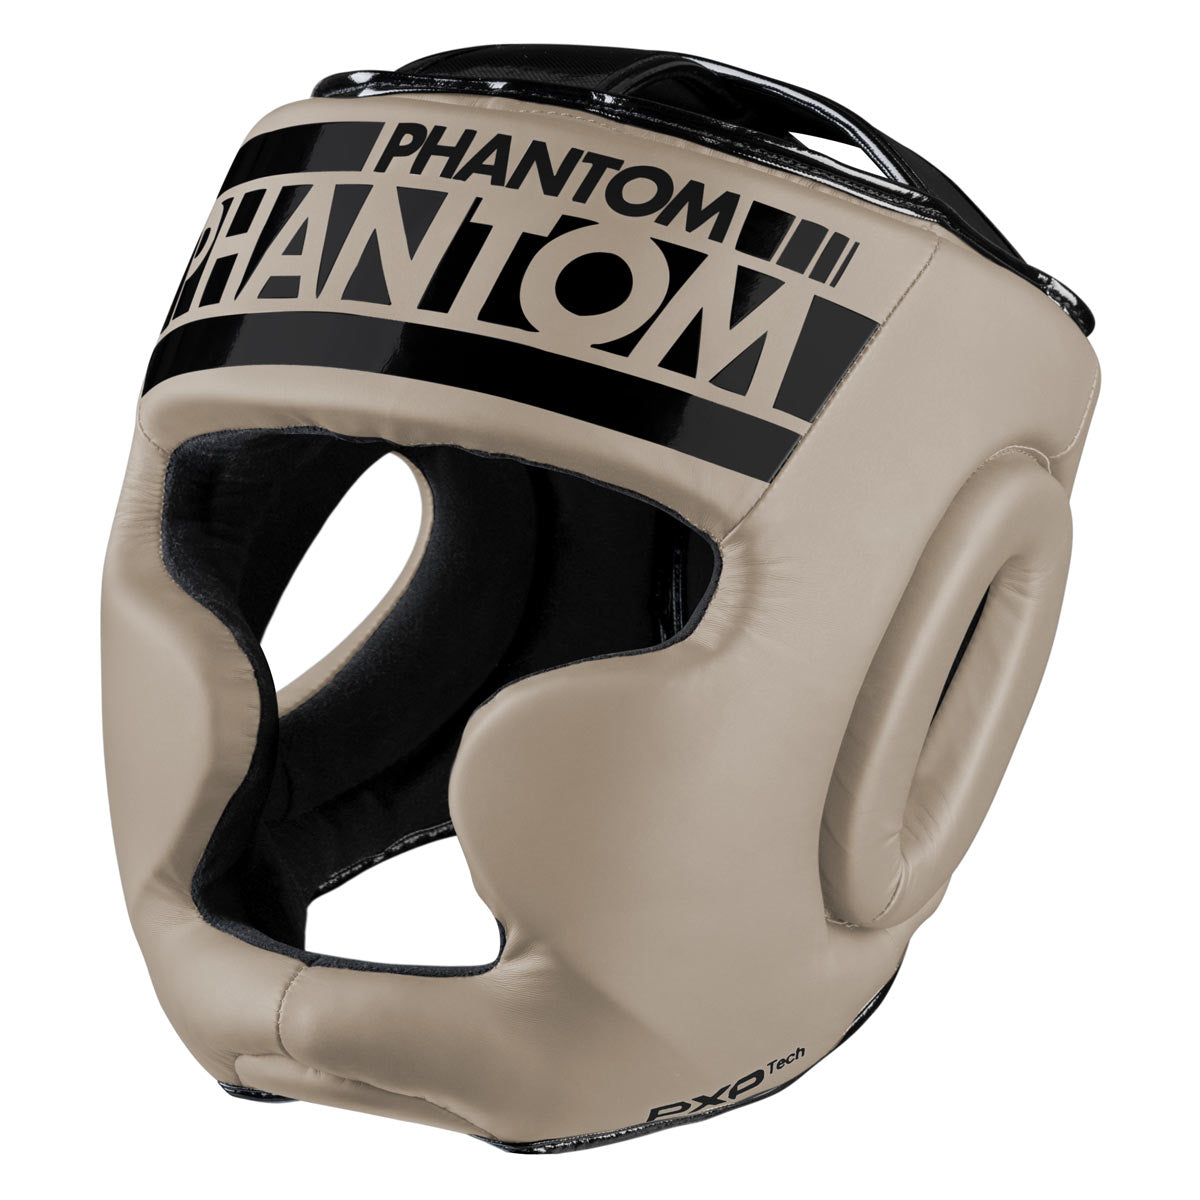 The Phantom APEX full face head protection for martial arts